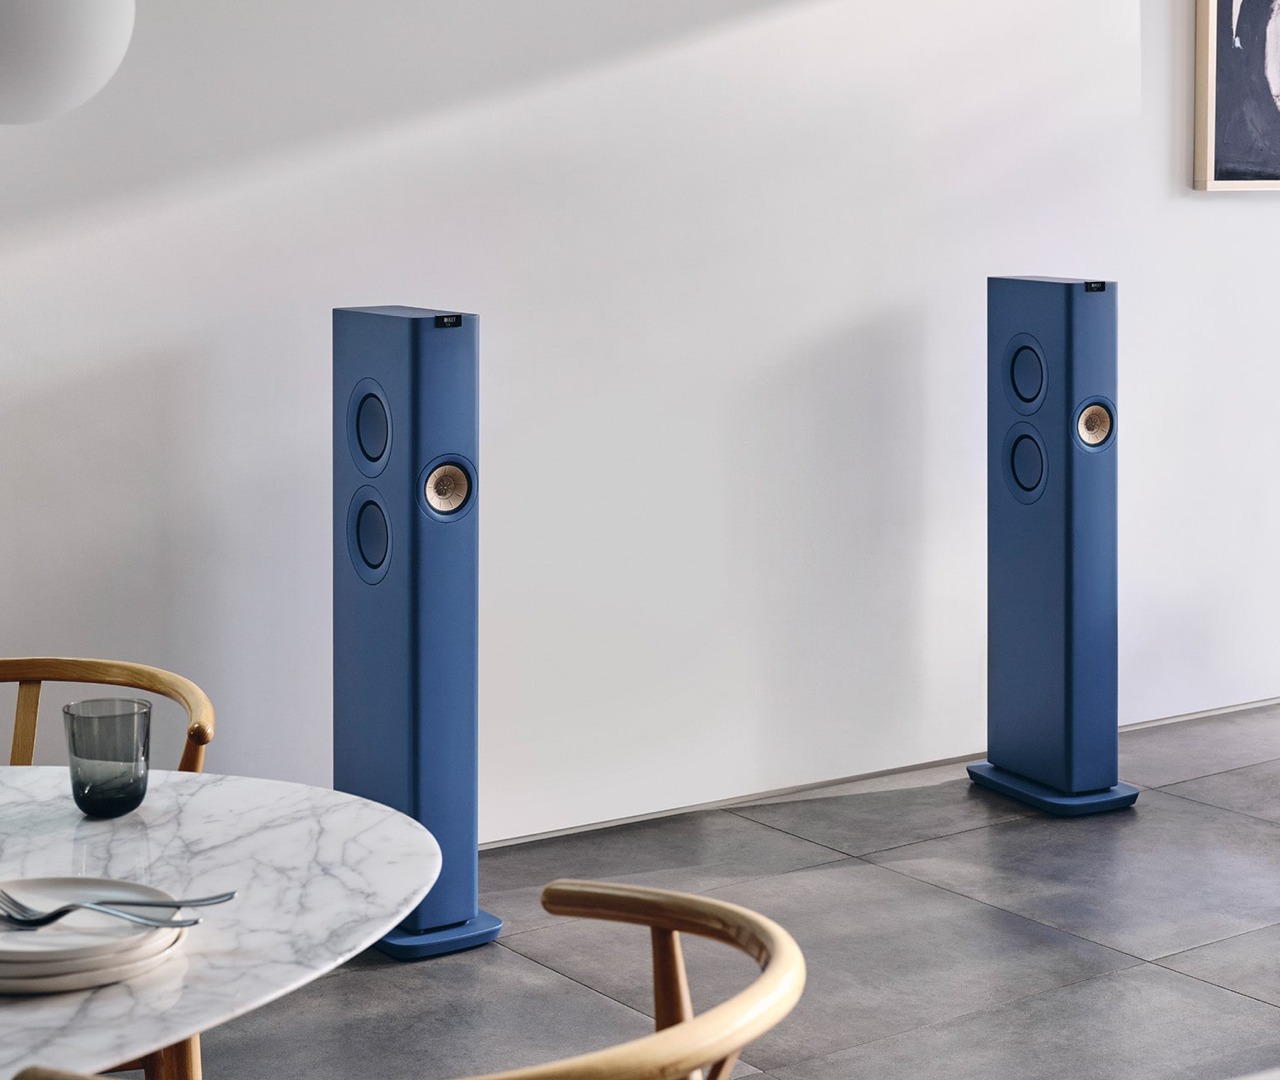 KEF Wireless HiFi Speakers deliver audio clarity wrapped in stunning designs